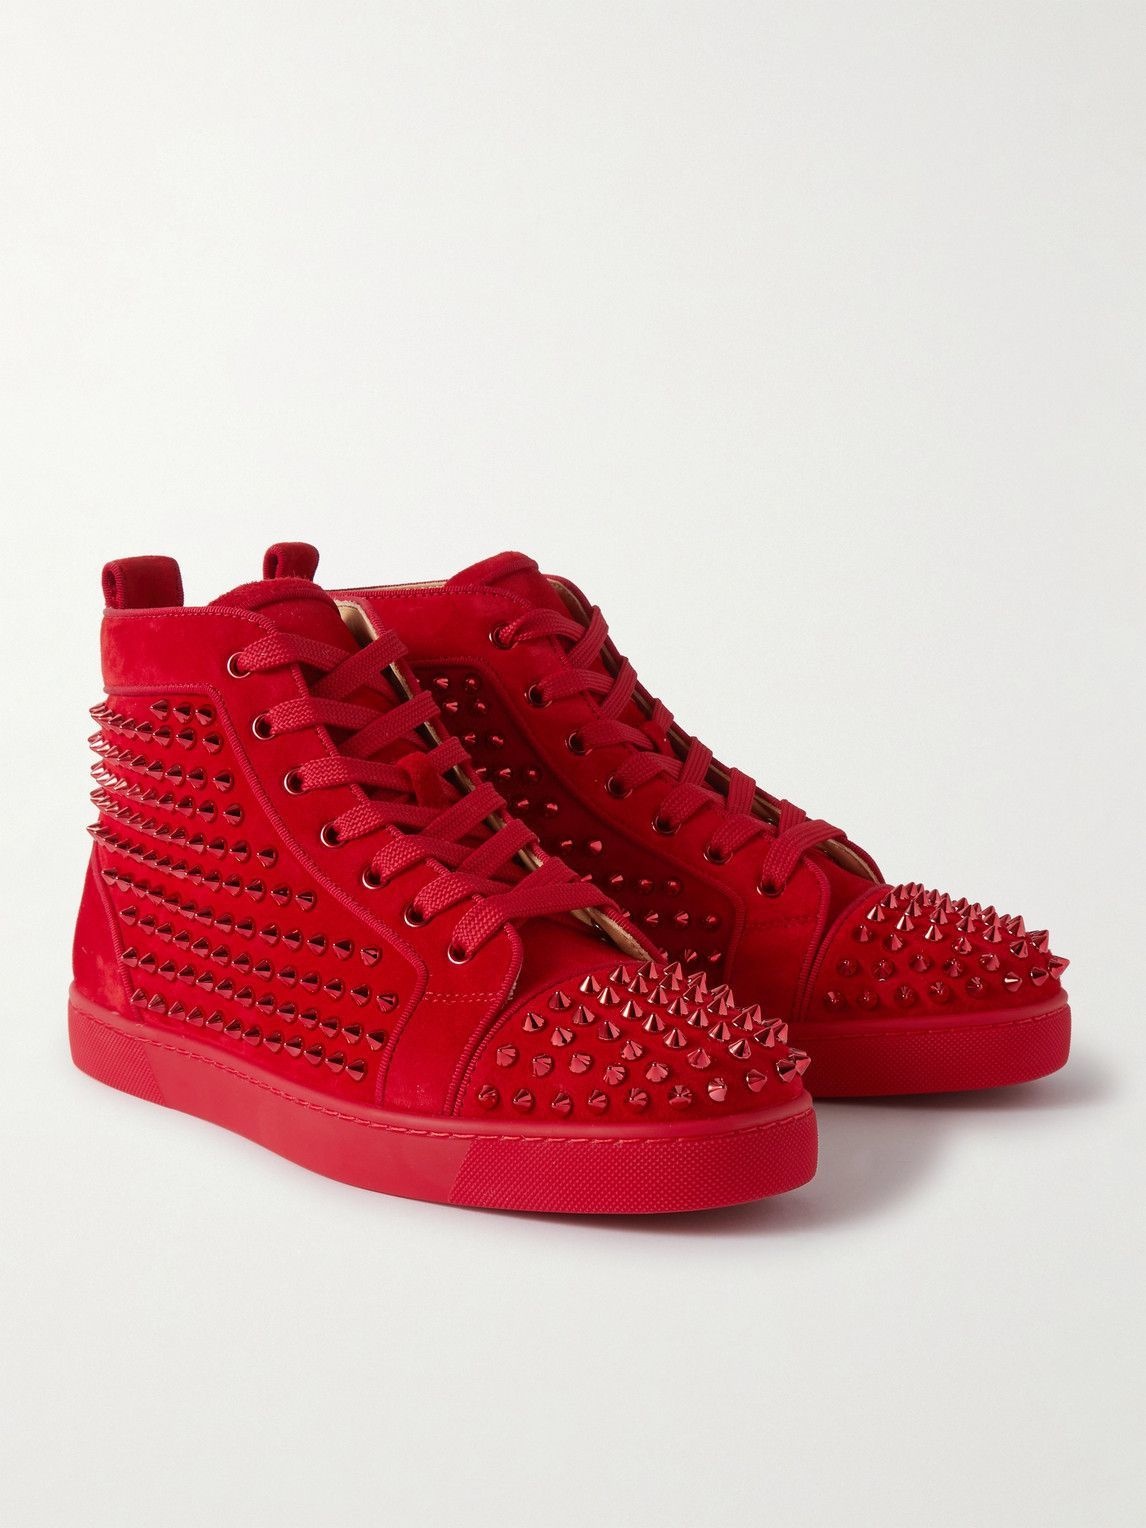 Christian Louboutin Louis Spike Suede High Top Sneaker in Red for Men